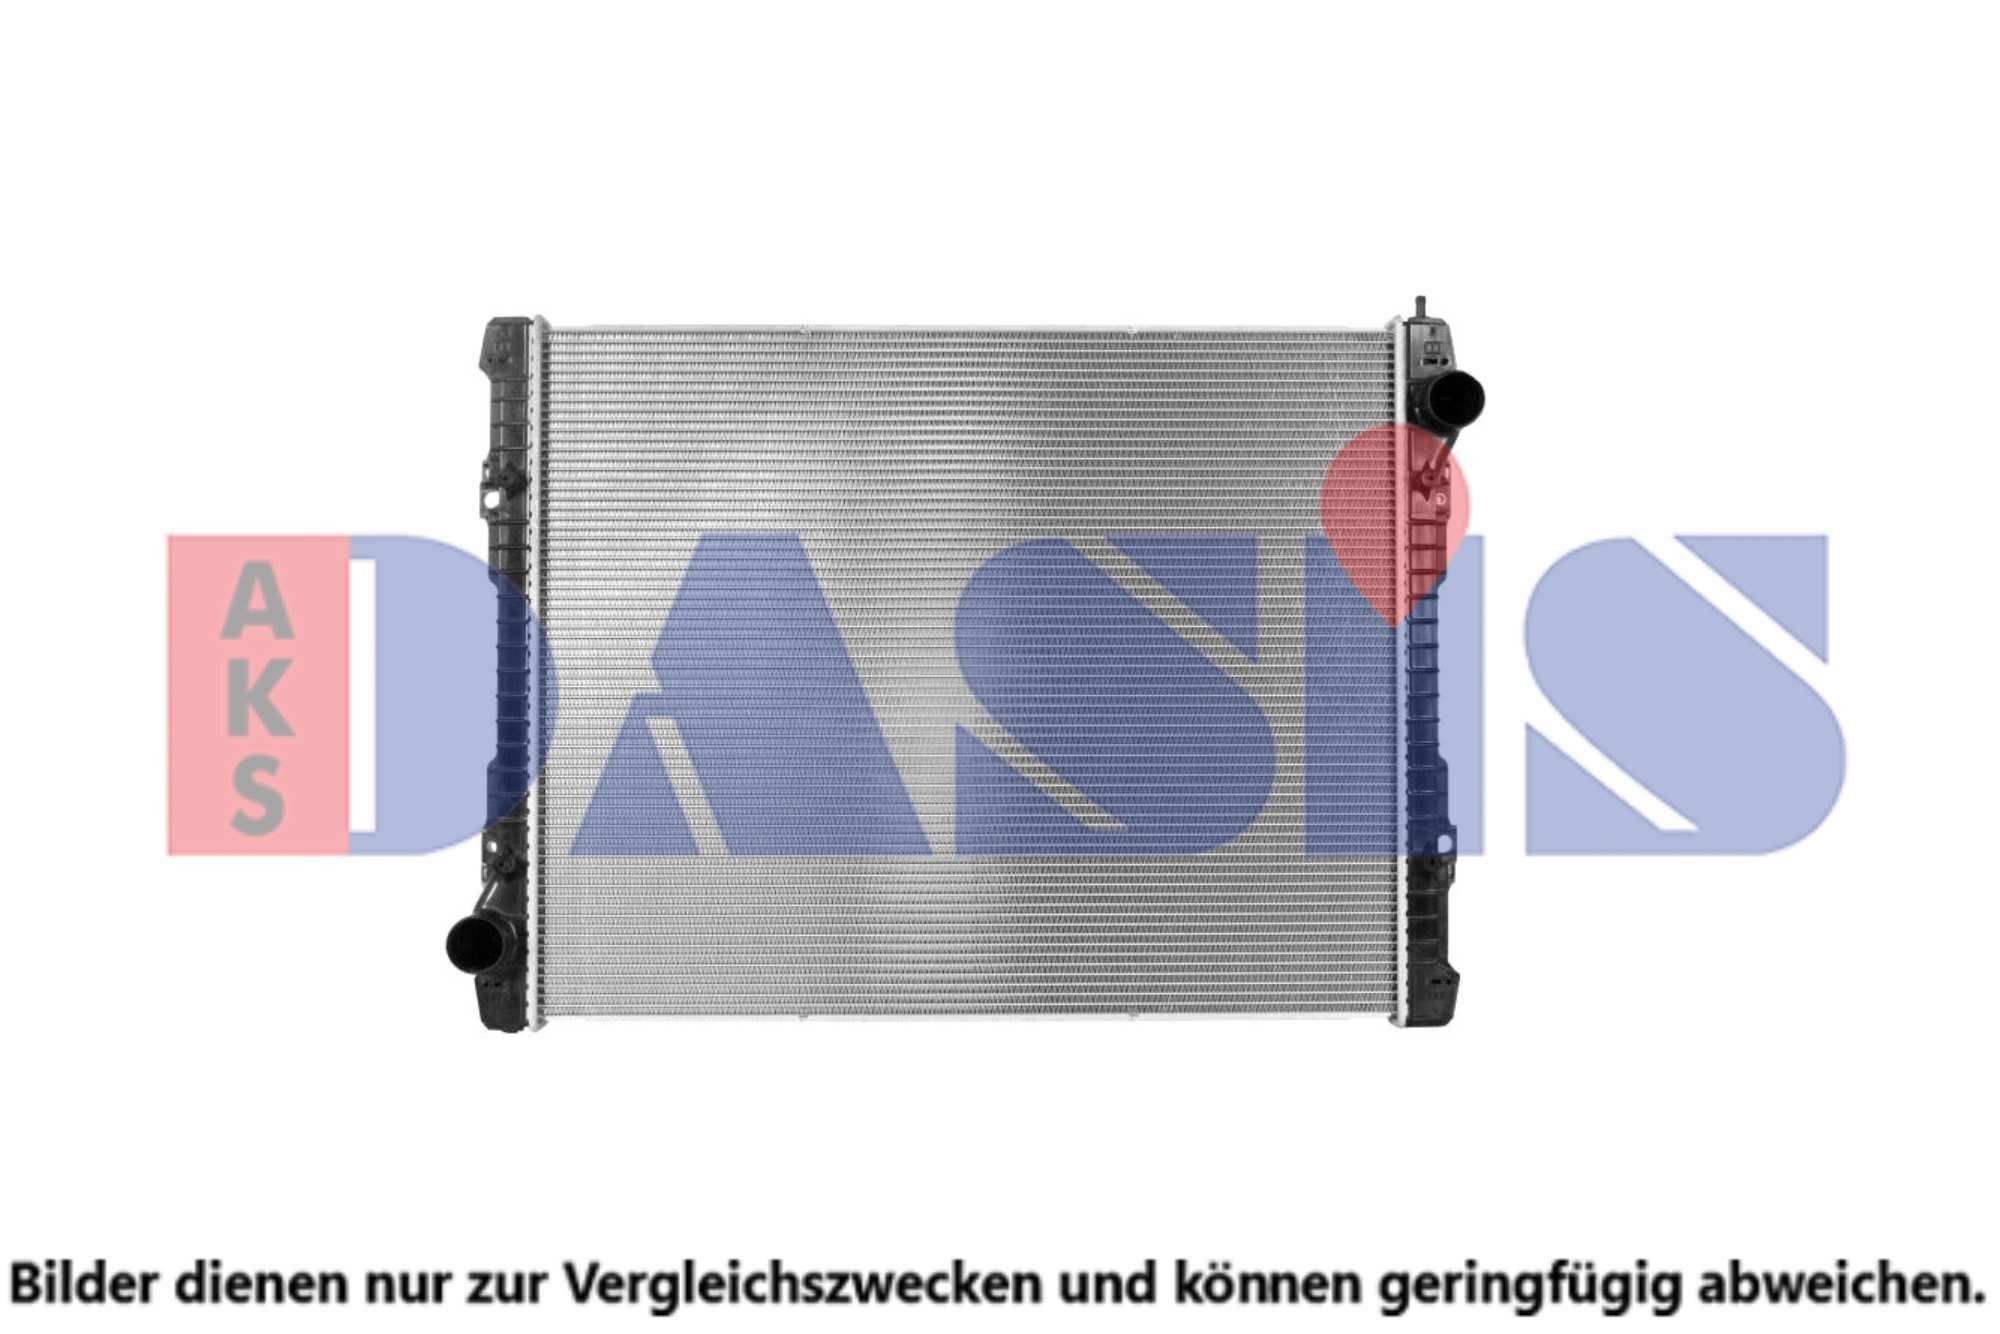 AKS DASIS Aluminium, 860 x 688 x 40 mm, without frame, Brazed cooling fins Radiator 270003SX buy